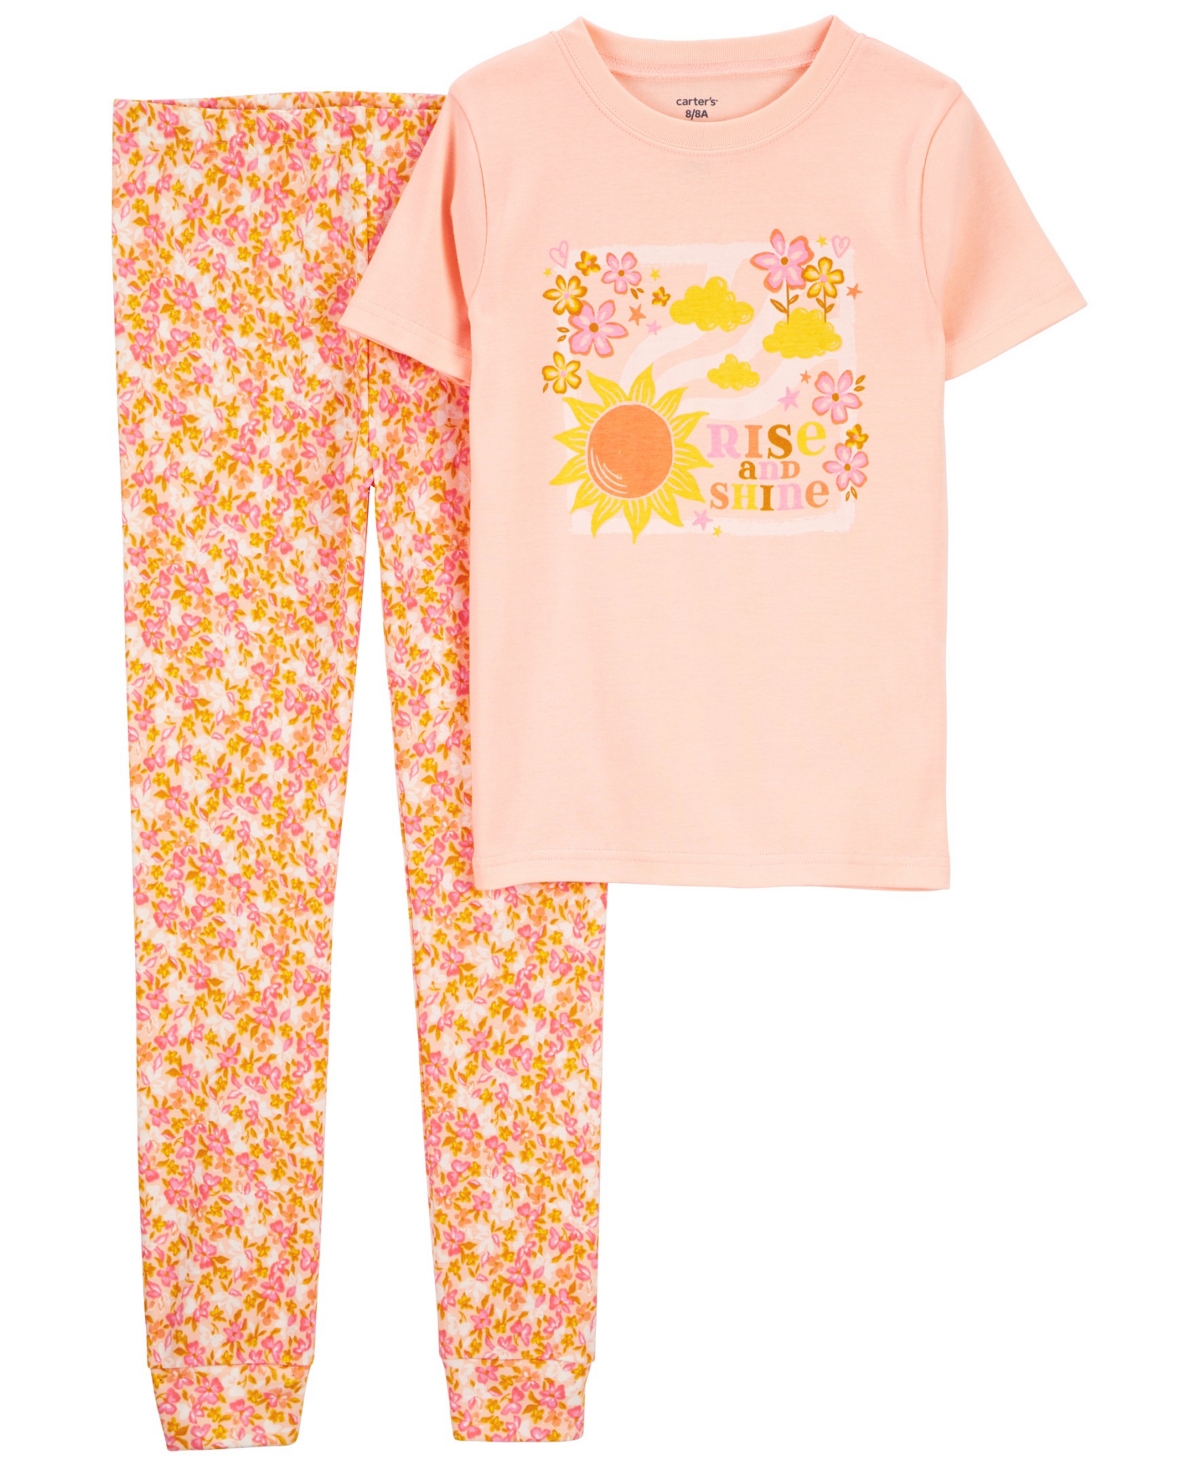 Carter's Kids' Big Girls 2 Piece Rise And Shine 100% Snug Fit Cotton Pajamas In Multi